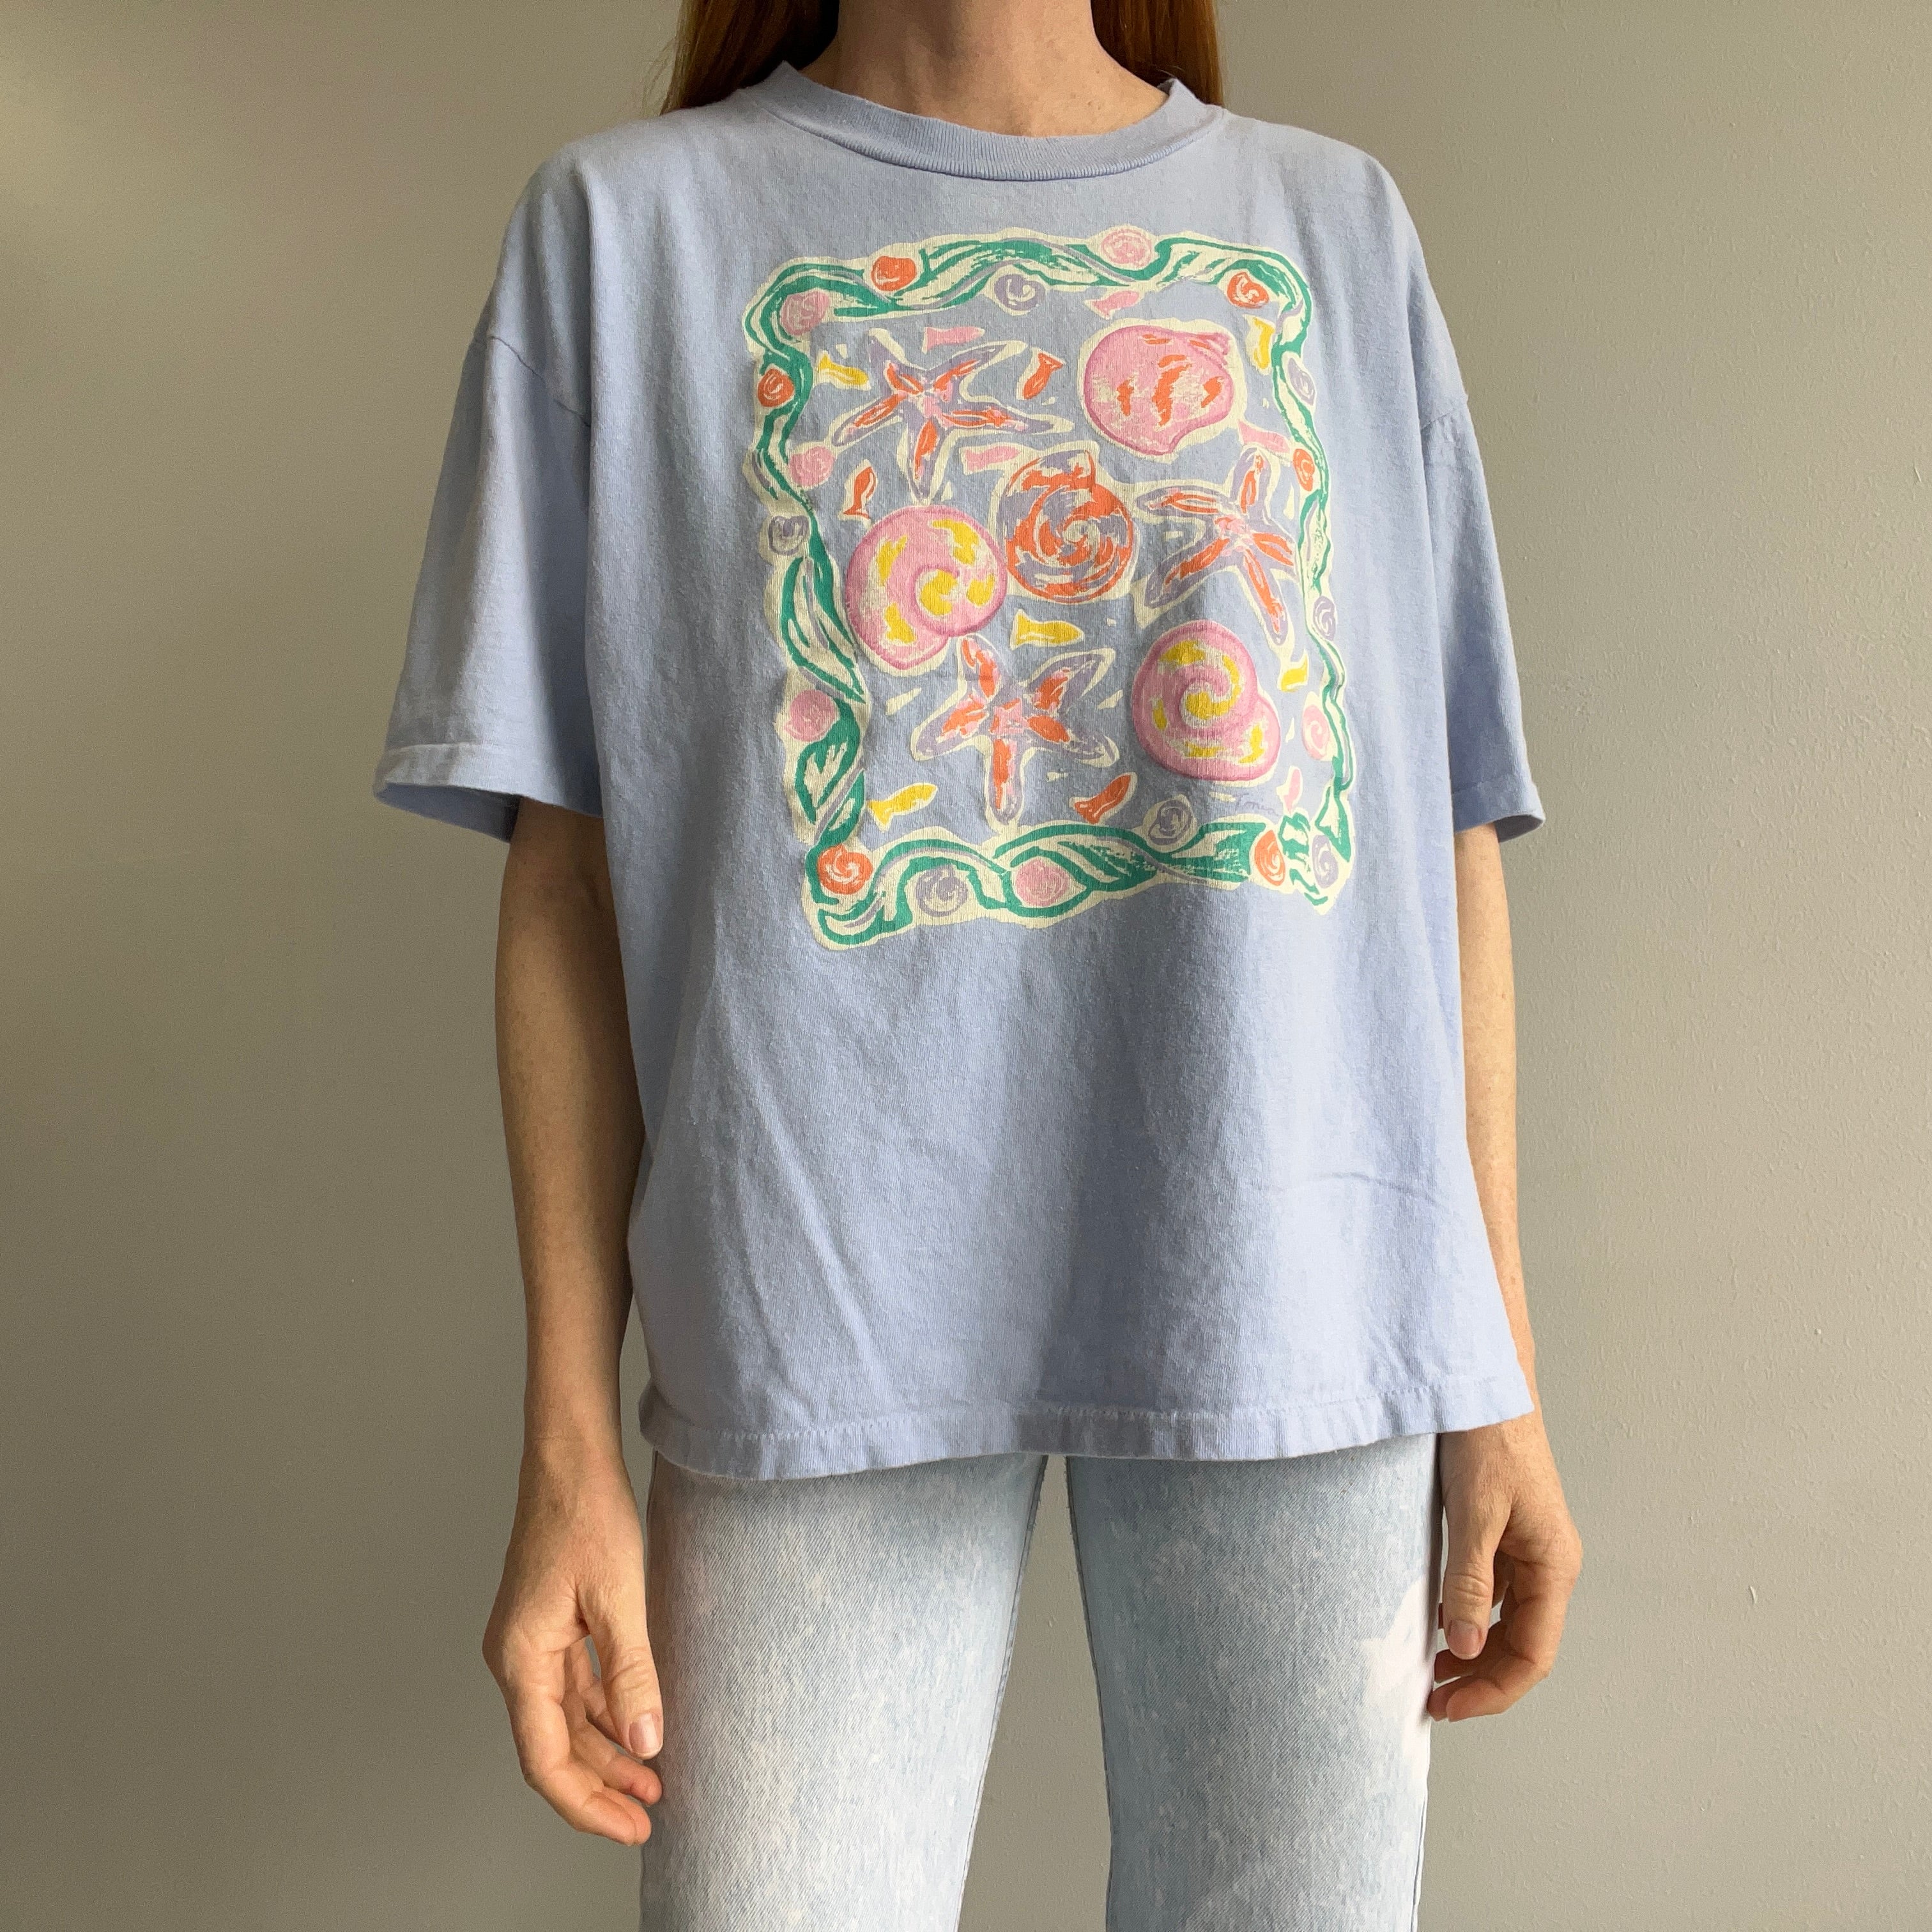 198/90s Pier 1 Imports Floral T-Shirt - Yes, That's Right